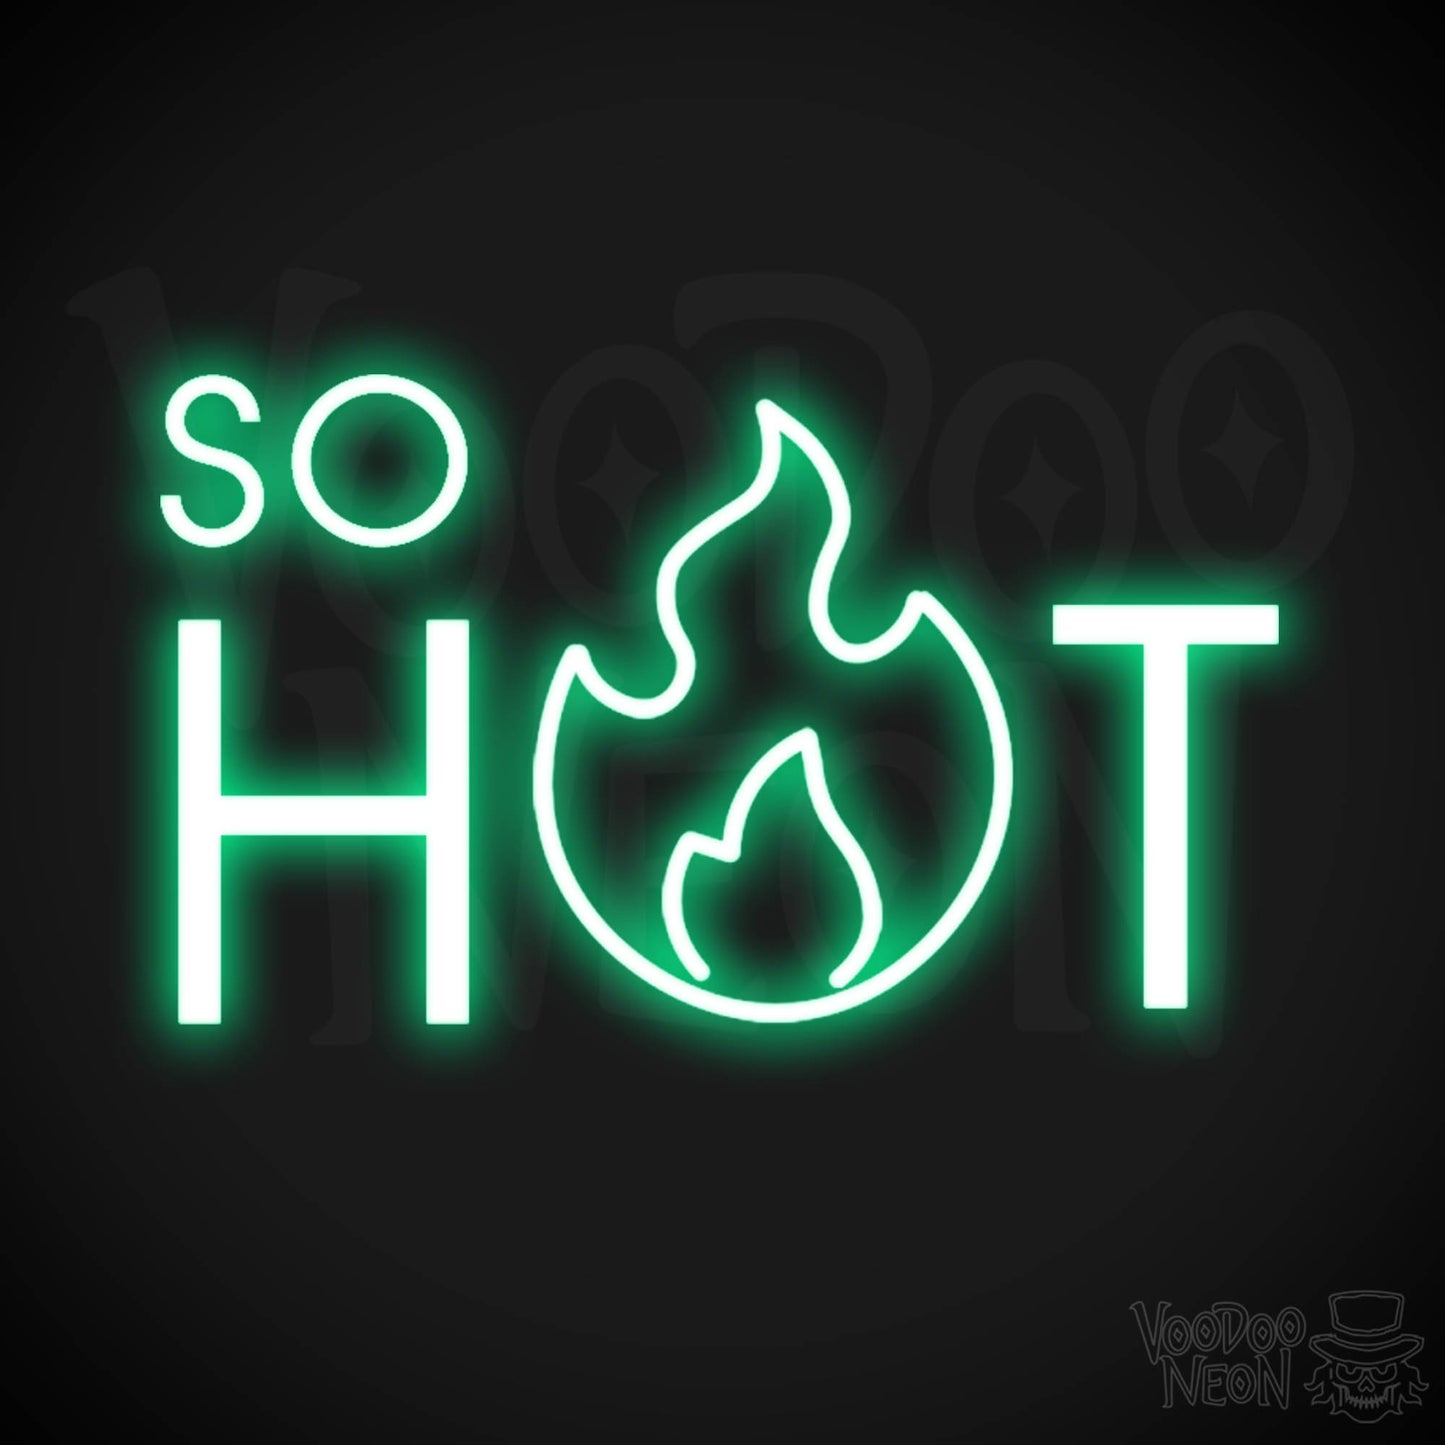 So Hot Neon Sign - Neon So Hot Sign - LED Neon Wall Art - Color Green